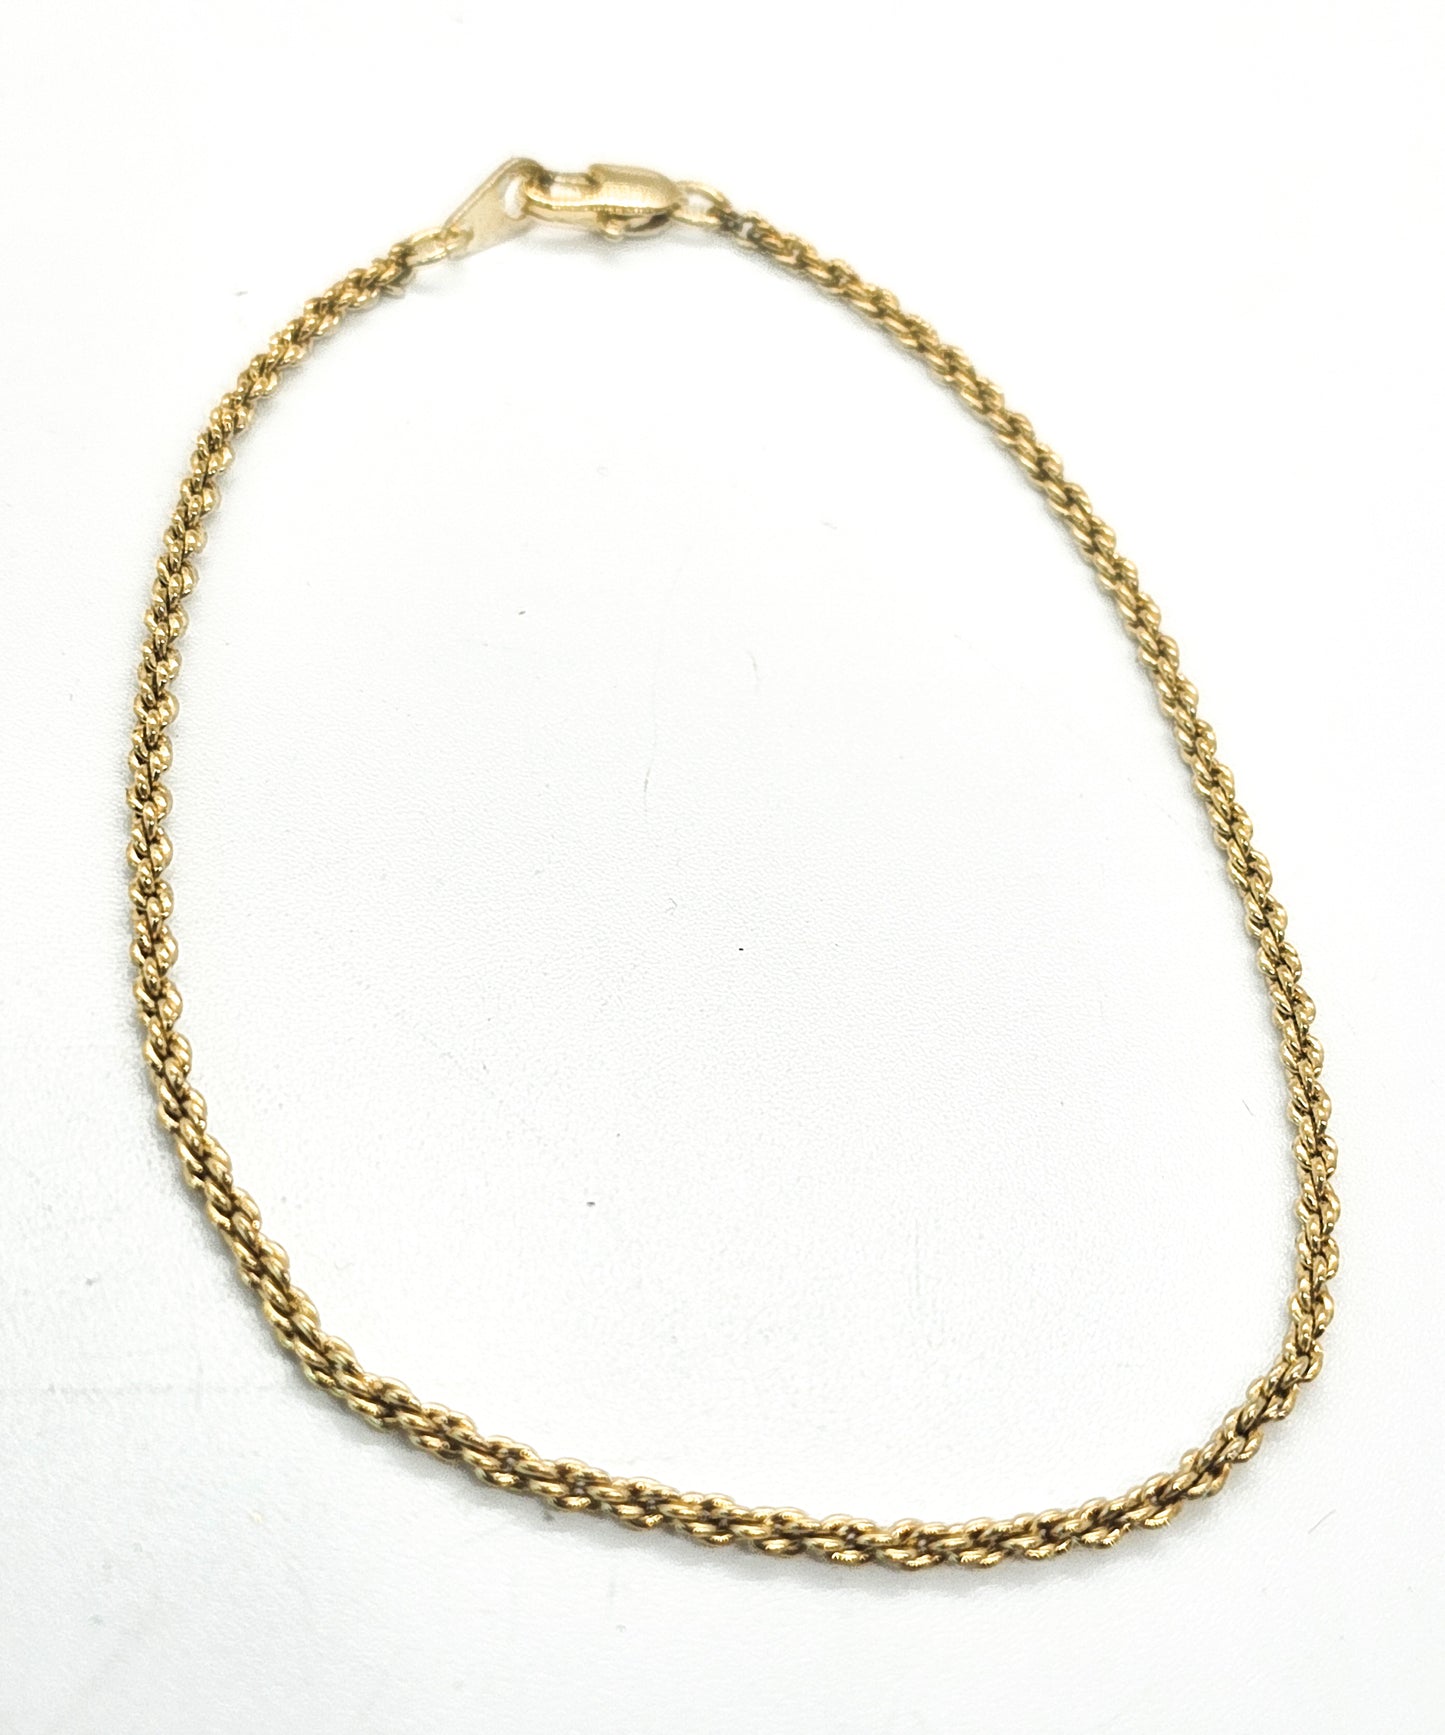 Twisted rope vintage retro 90's gold toned tennis bracelet 7.5 inches